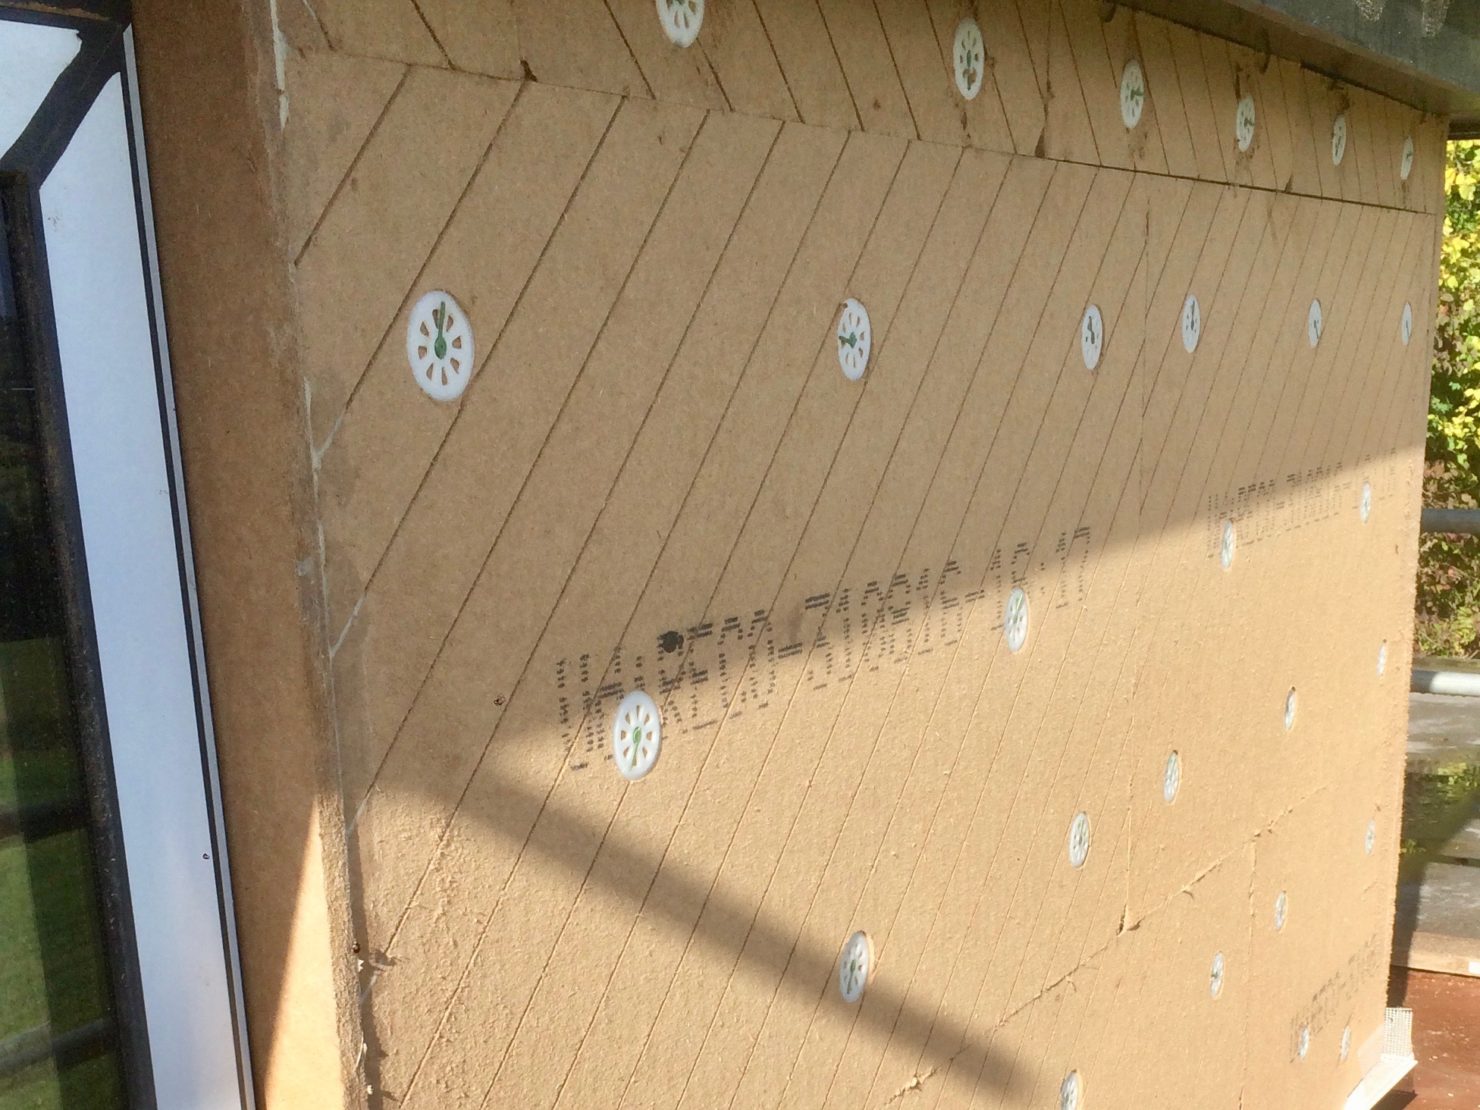 Here you can see the UdiDiffutherm wood fibre insulation reveal boards glued in to place in a window reveal within the UdiRECO system. In spite of the wall having a 200mm lean forward over it’s height, once the system was installed it’s levelling compensation made it difficult to see any lean whatsoever.